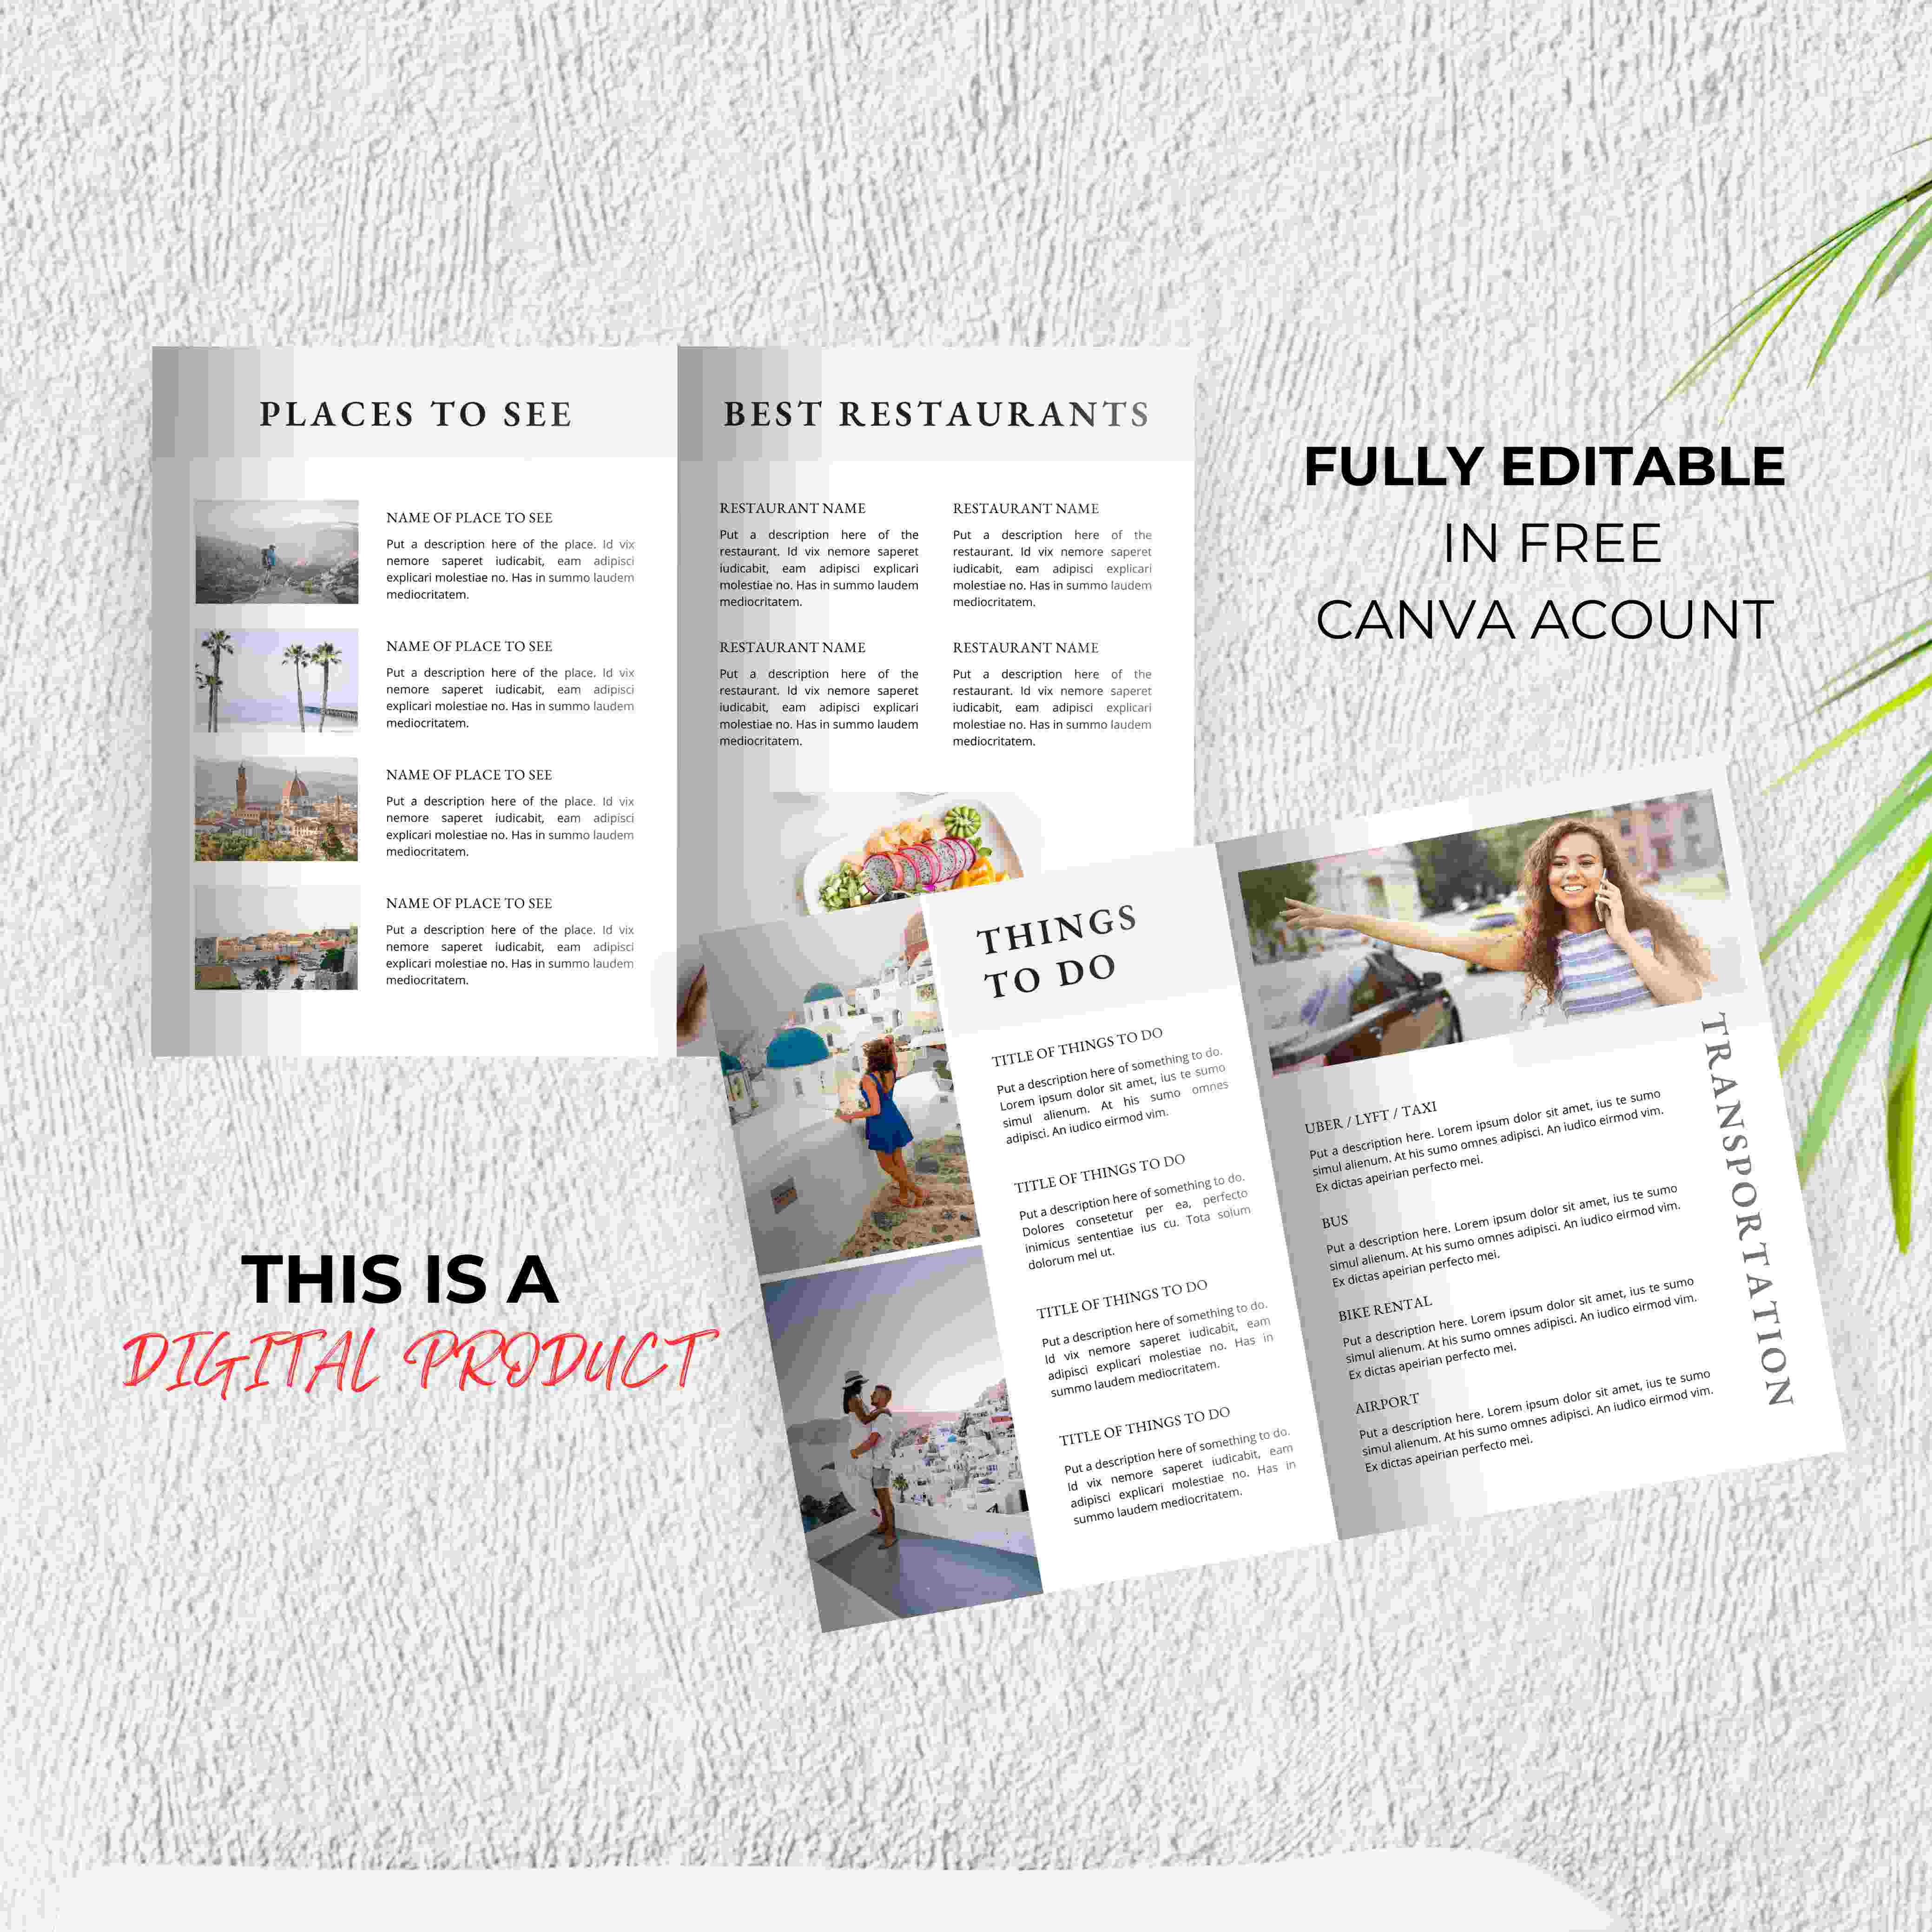 Airbnb welcome book Template Digital Welcome Book Airbnb House Rules Airbnb welcome sign - impress your guests with a professional touch preview image.